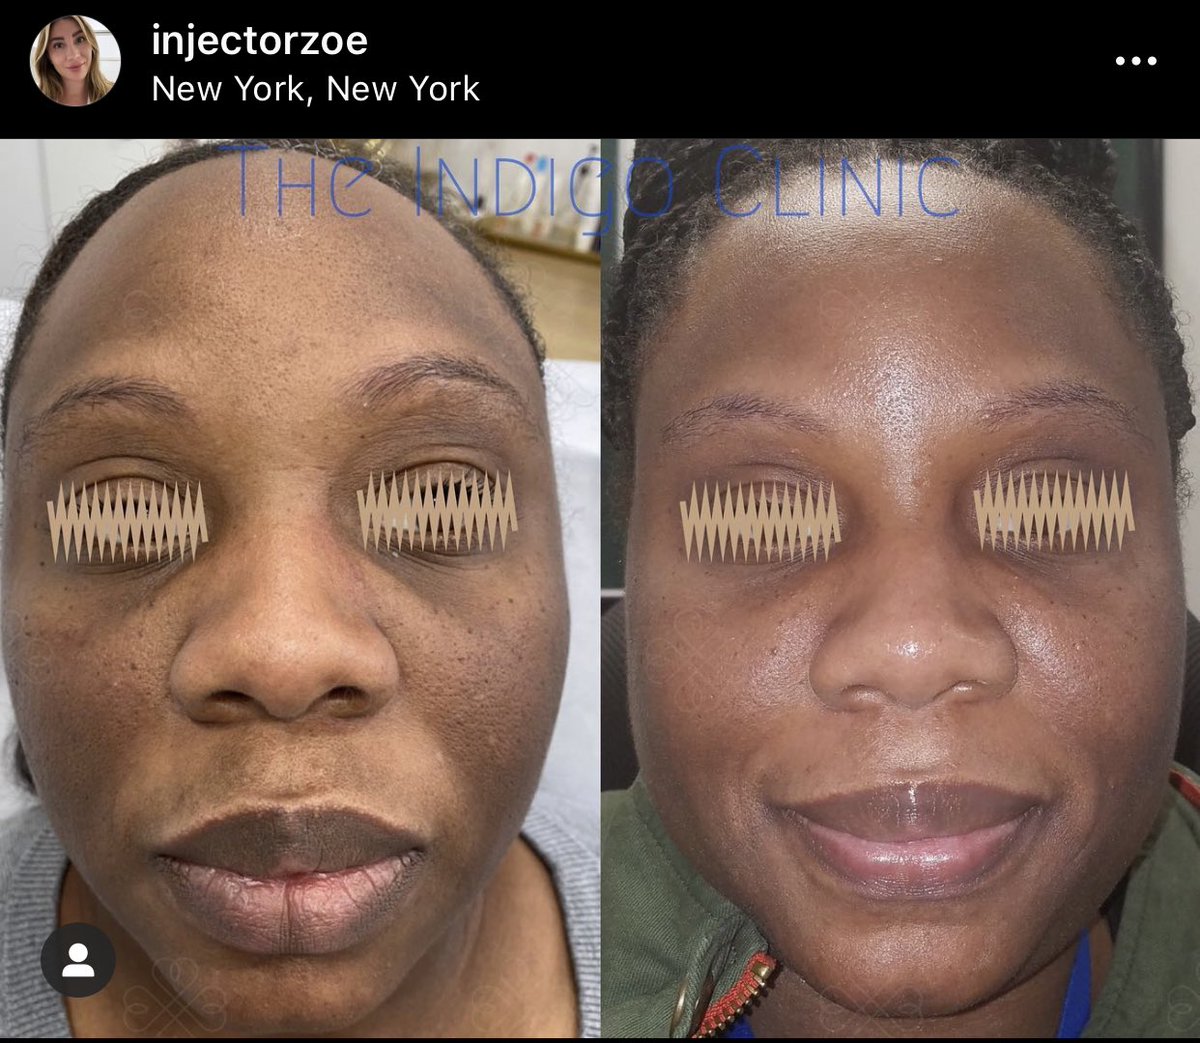 Enlighten Peel in NYC by Injector Zoe. She’s also allowed to provide it virtually. She charges 550/675 (may have changed) + shipping